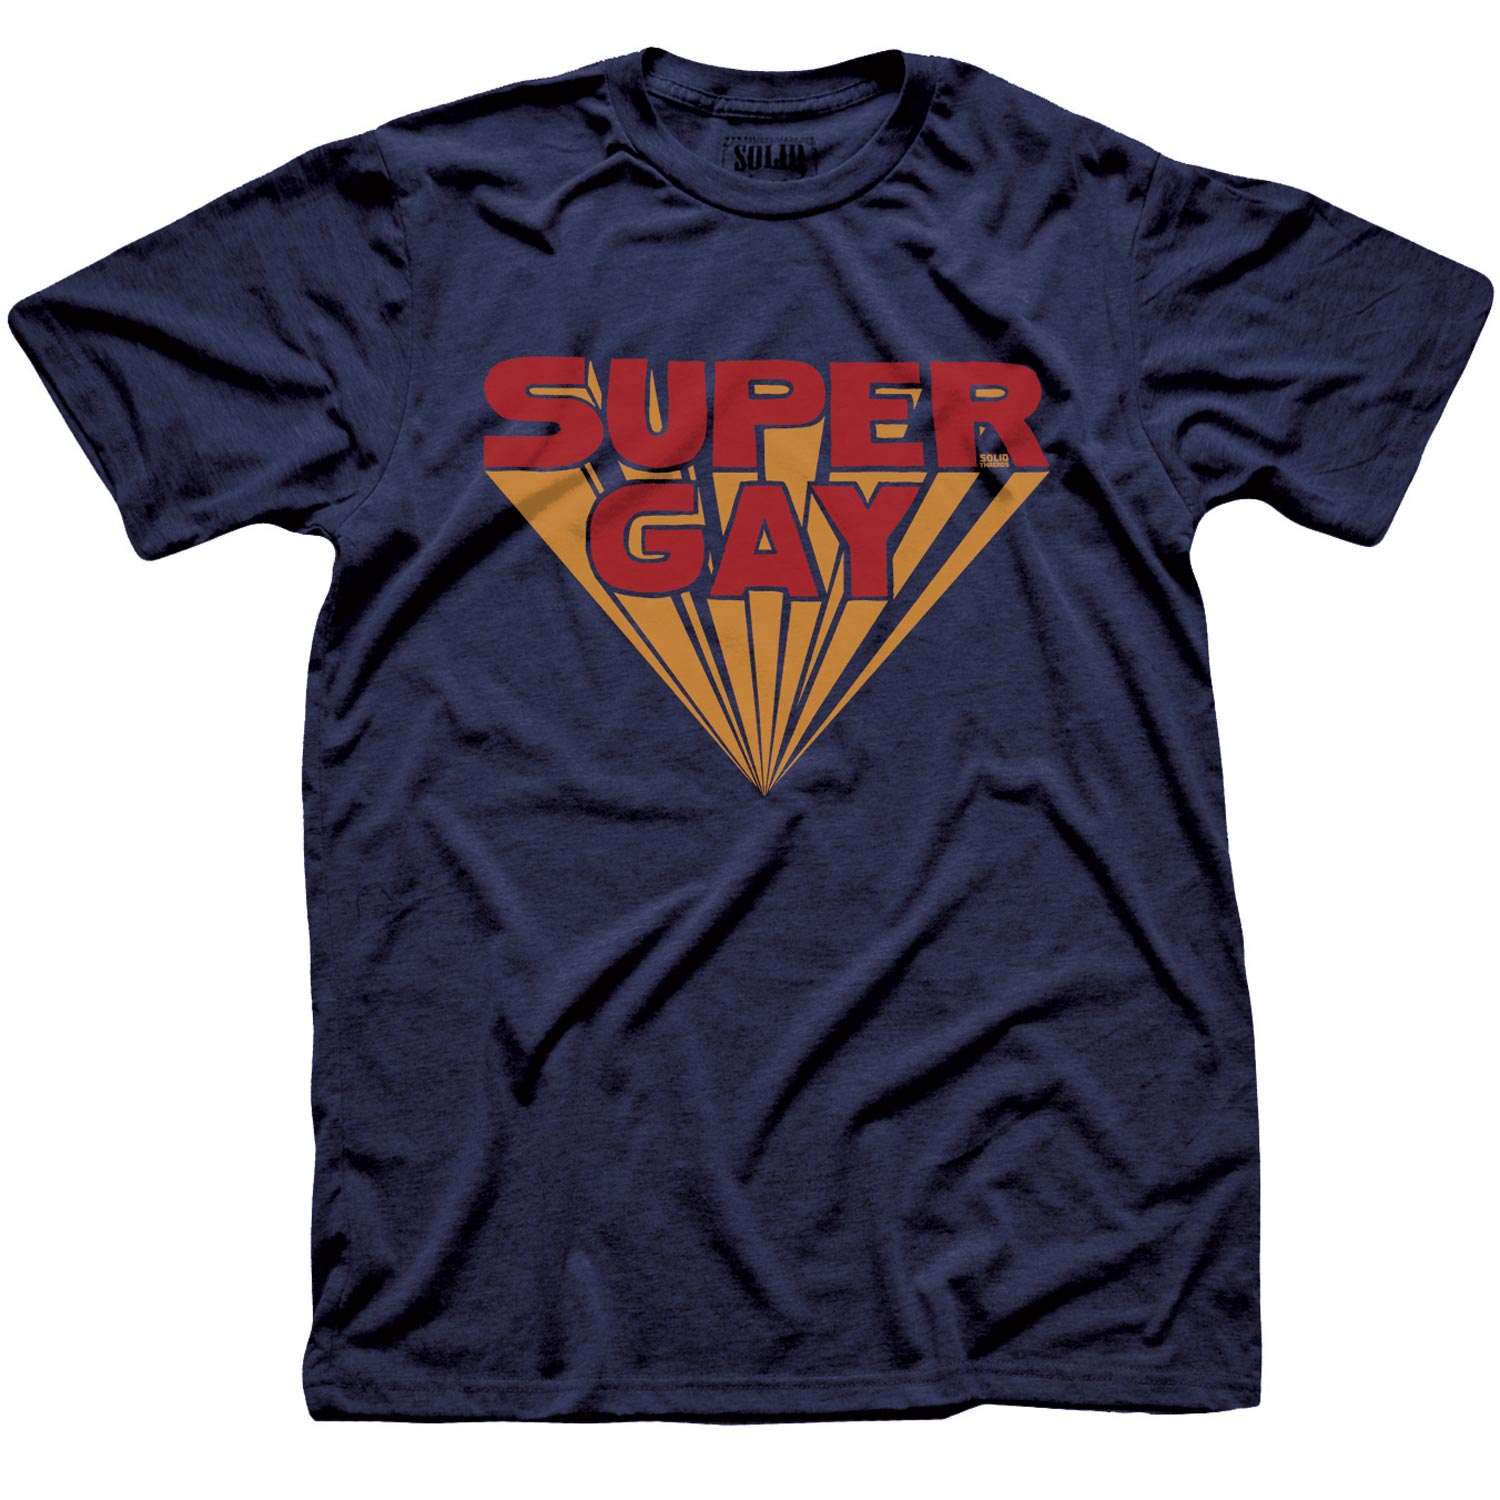 Men's Vintage Super Gay Graphic Tee | Cool Retro Gay Rights Navy T-shirt for Pride Month